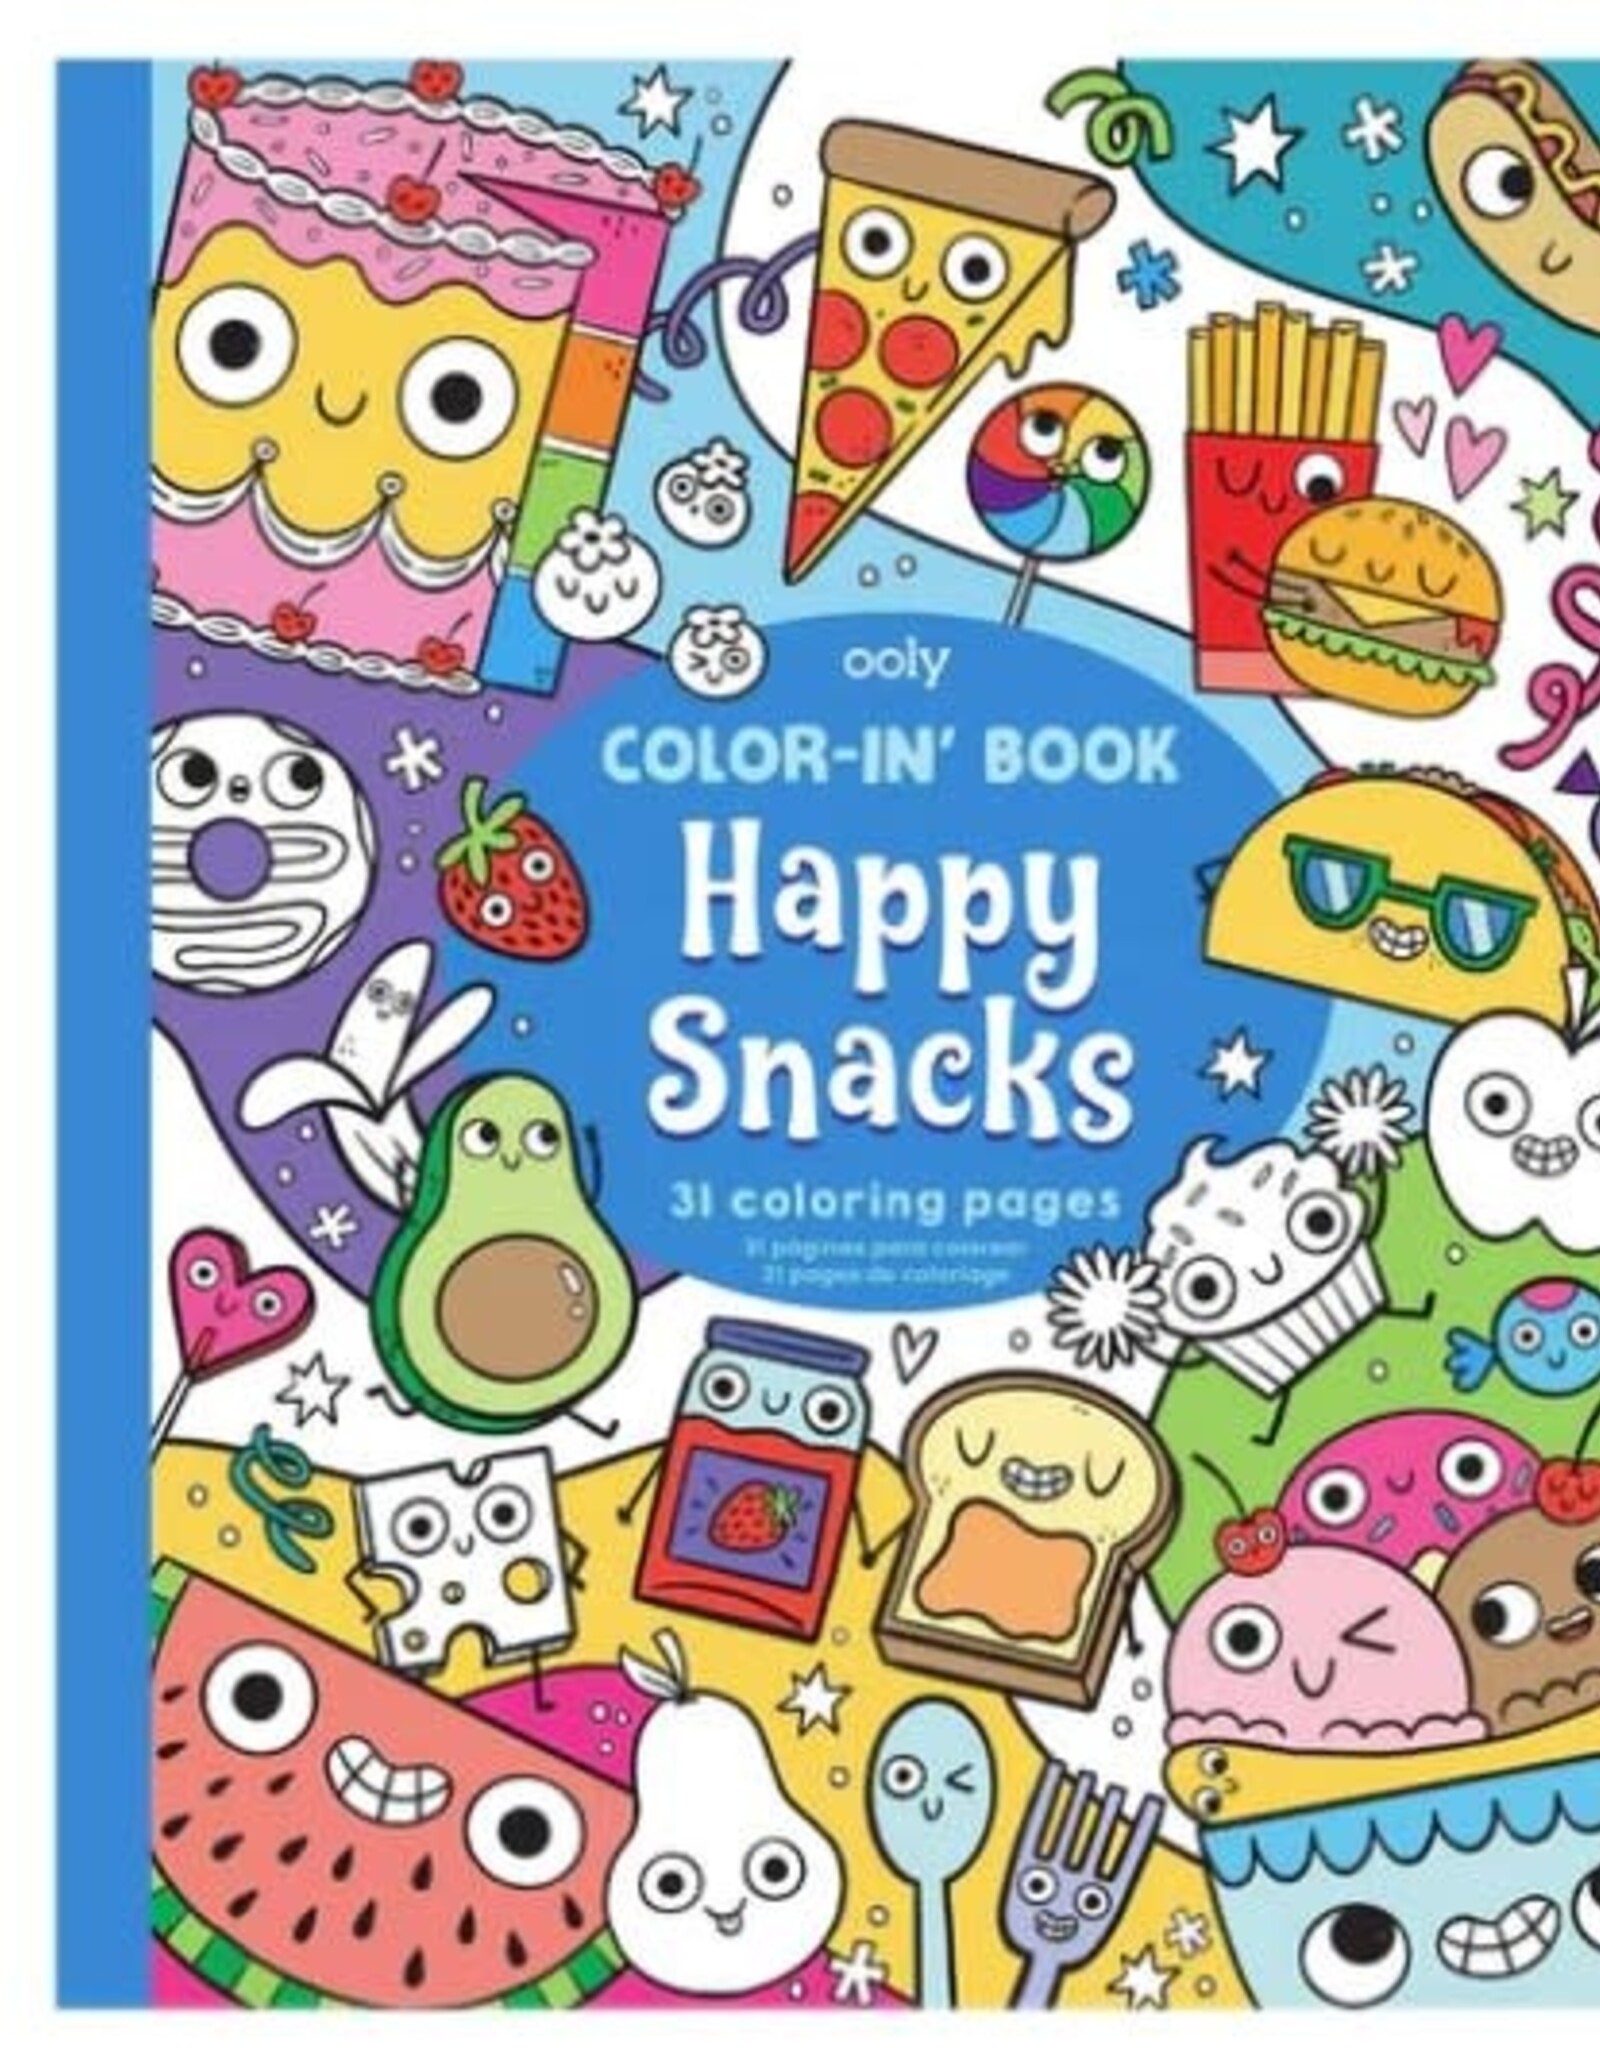 OOLY COLOUR-IN' BOOK - HAPPY SNACKS